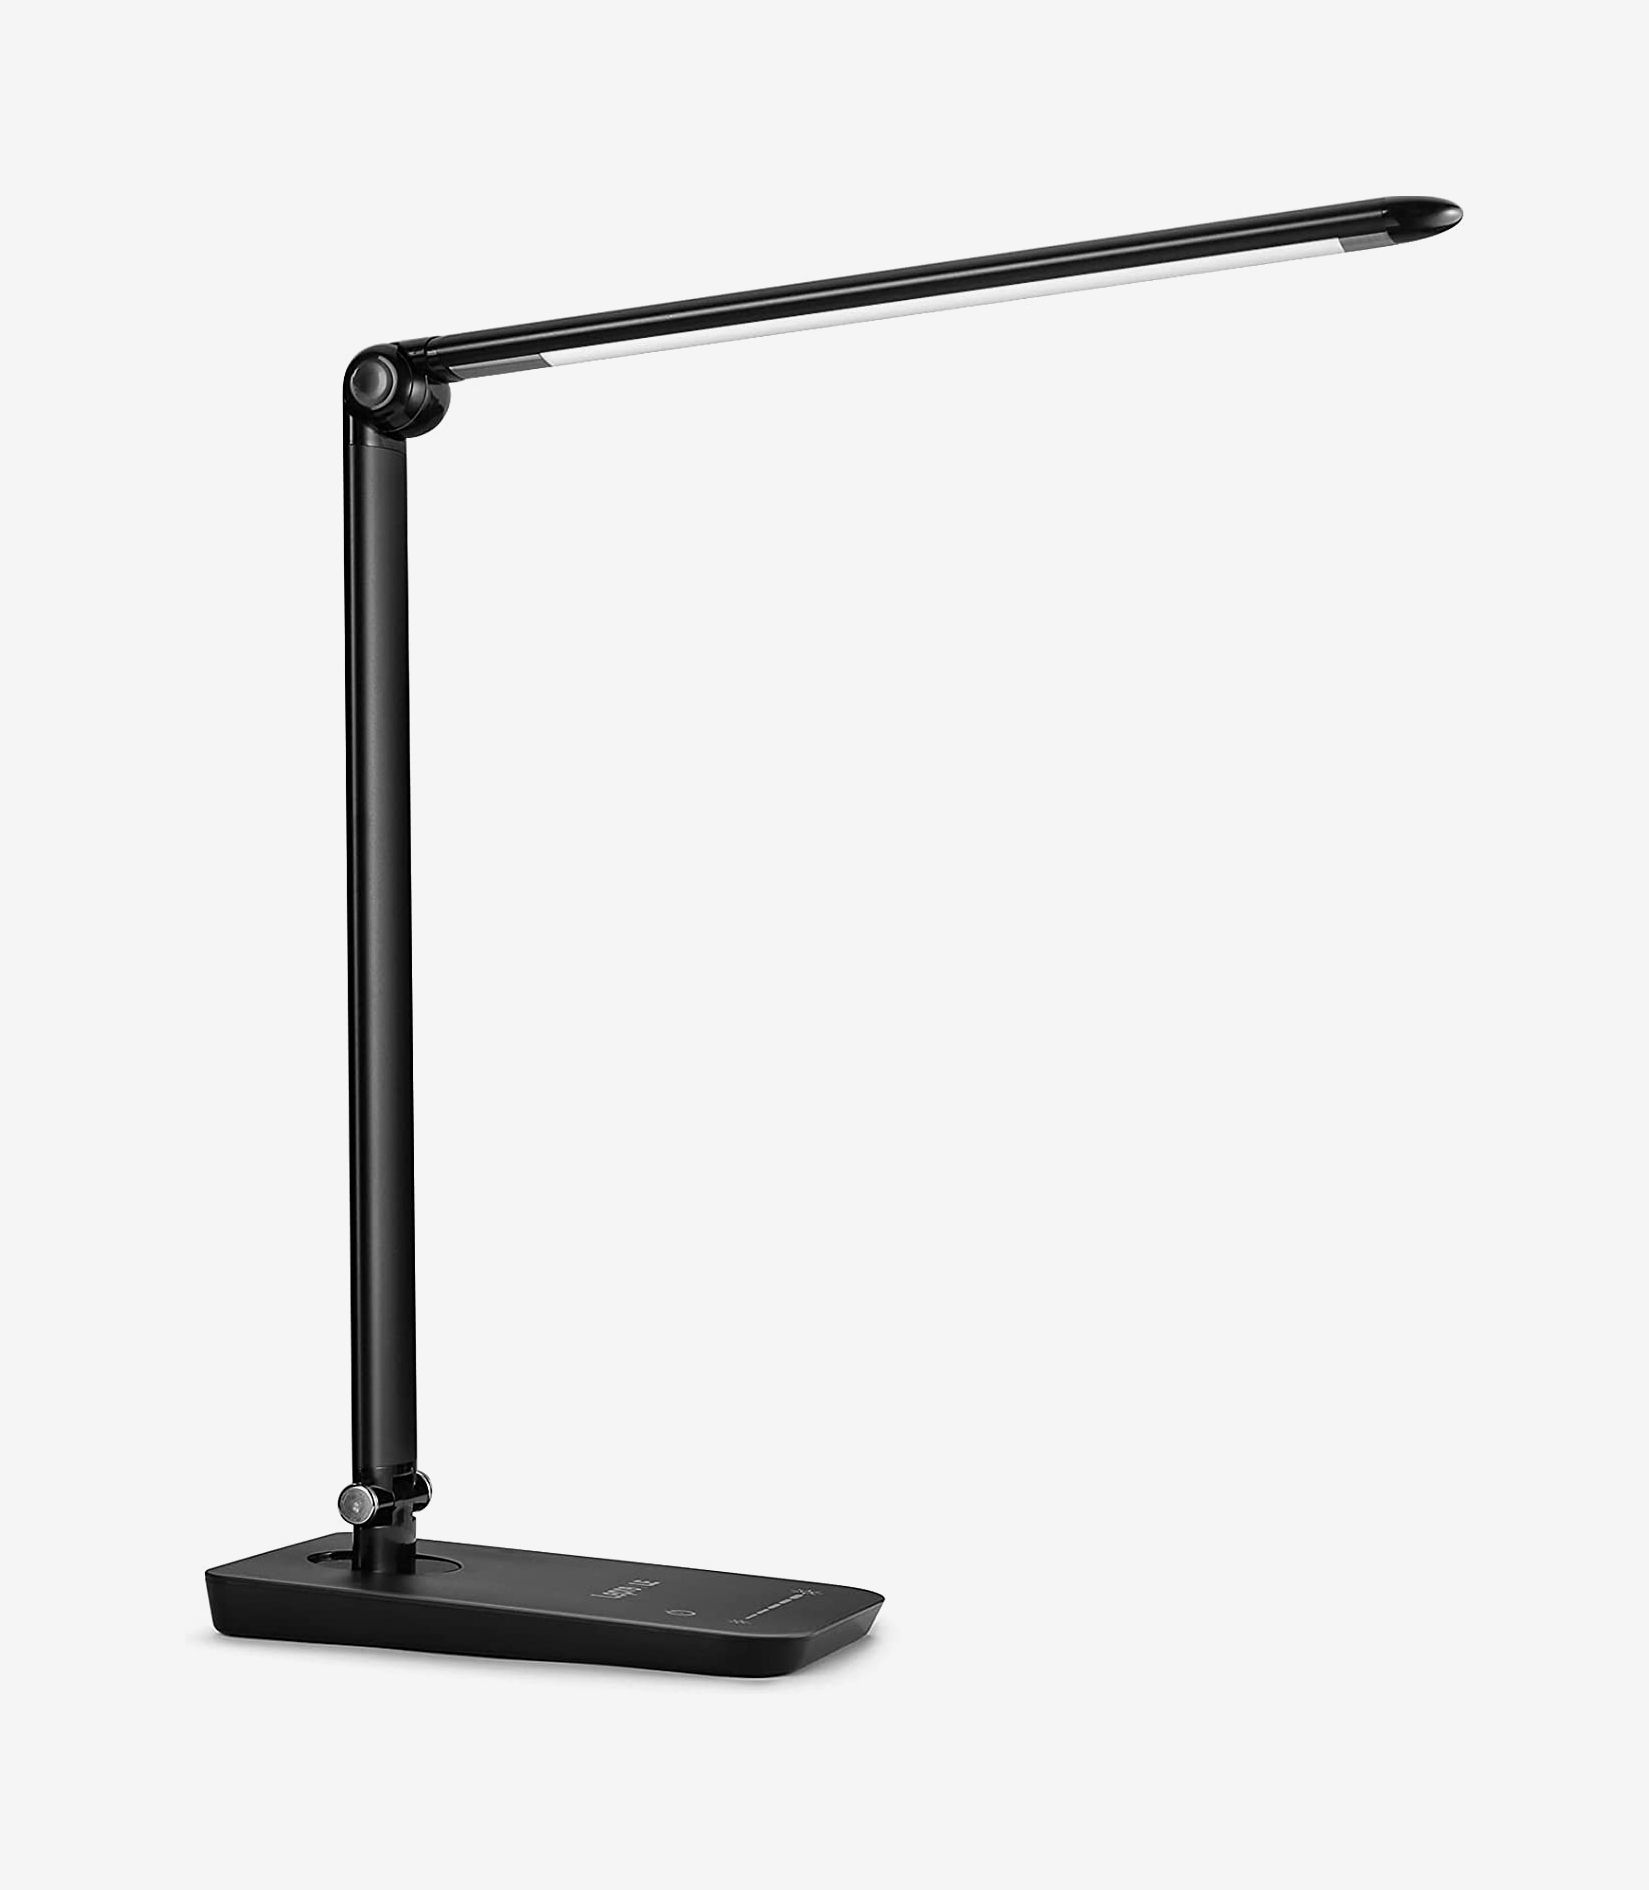 White LED Reading lamp Small Desk Lamp with 3 Brightness Levels and Blue Night Light Reading Lamp with Touch Control Desk Lamps for Home Office 